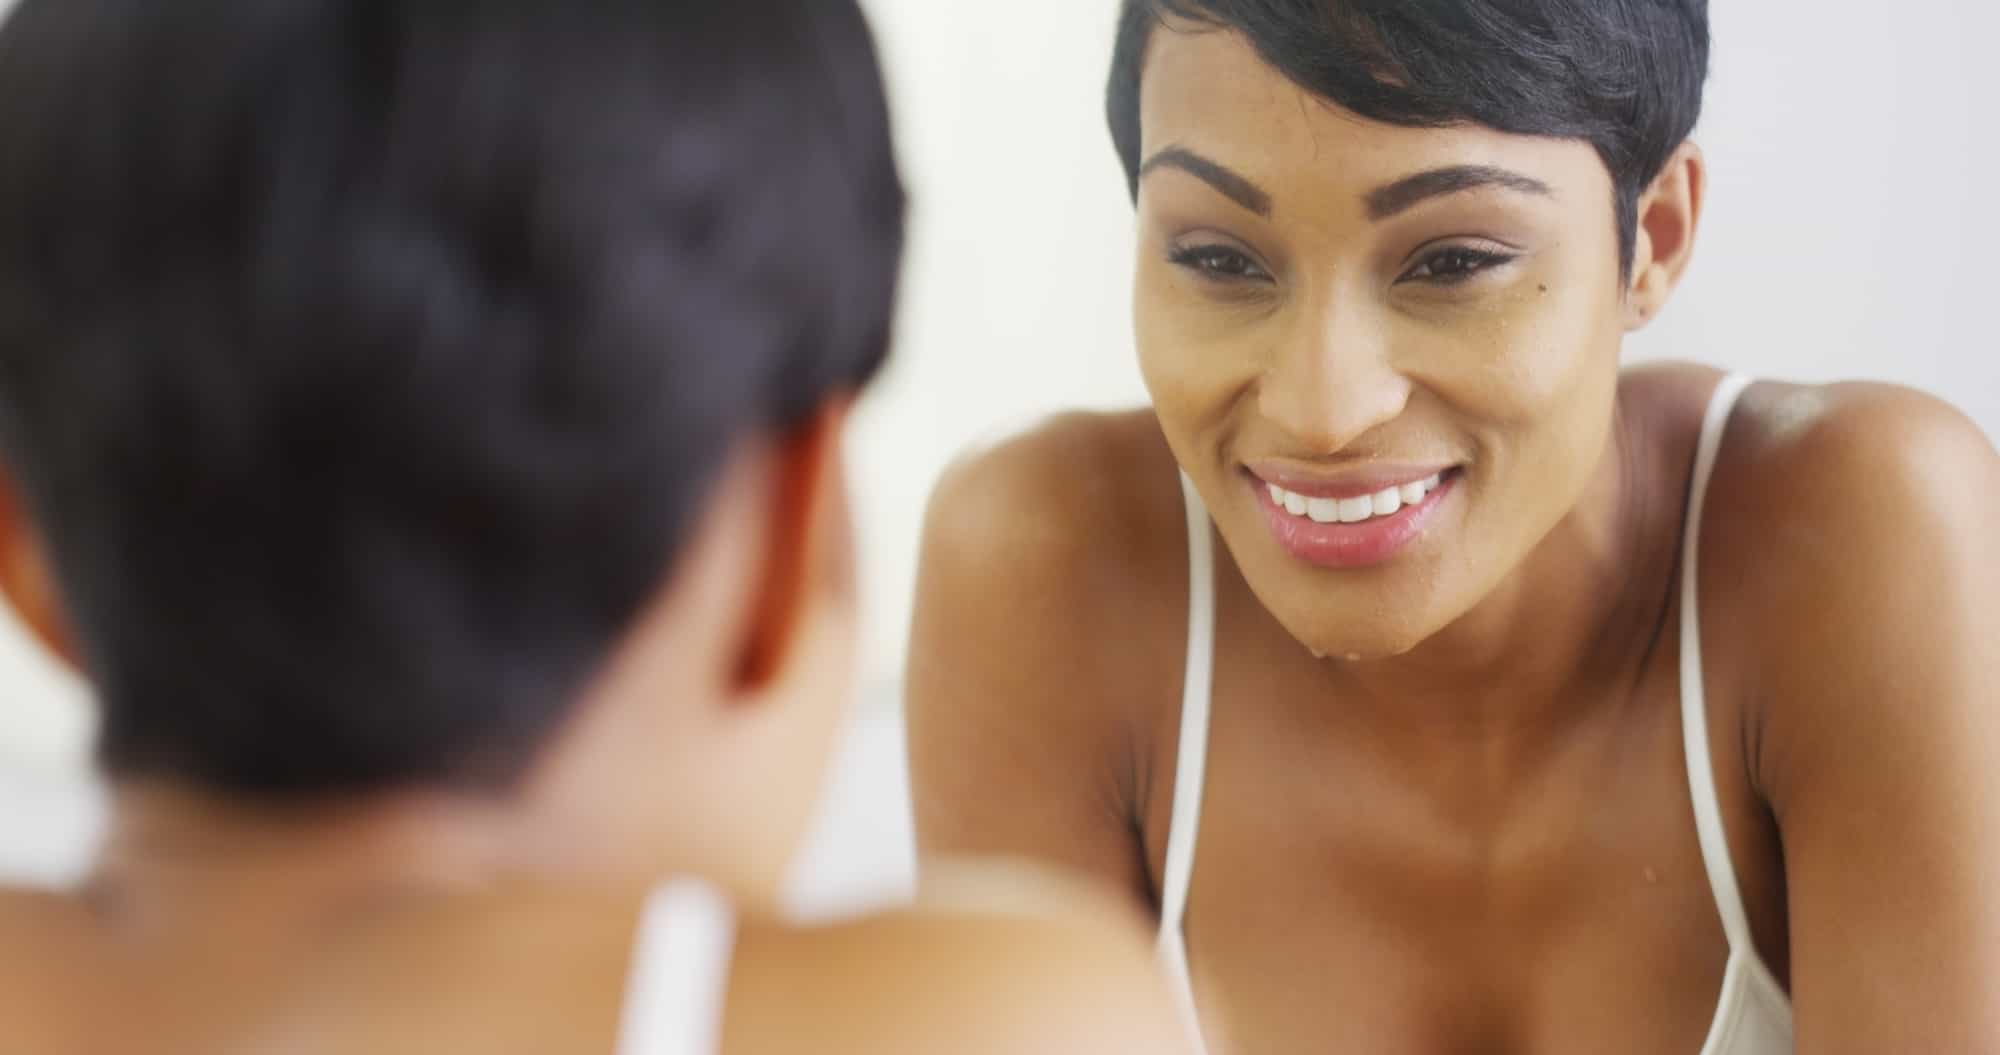 Black woman cleaning face with water and looking in mirror